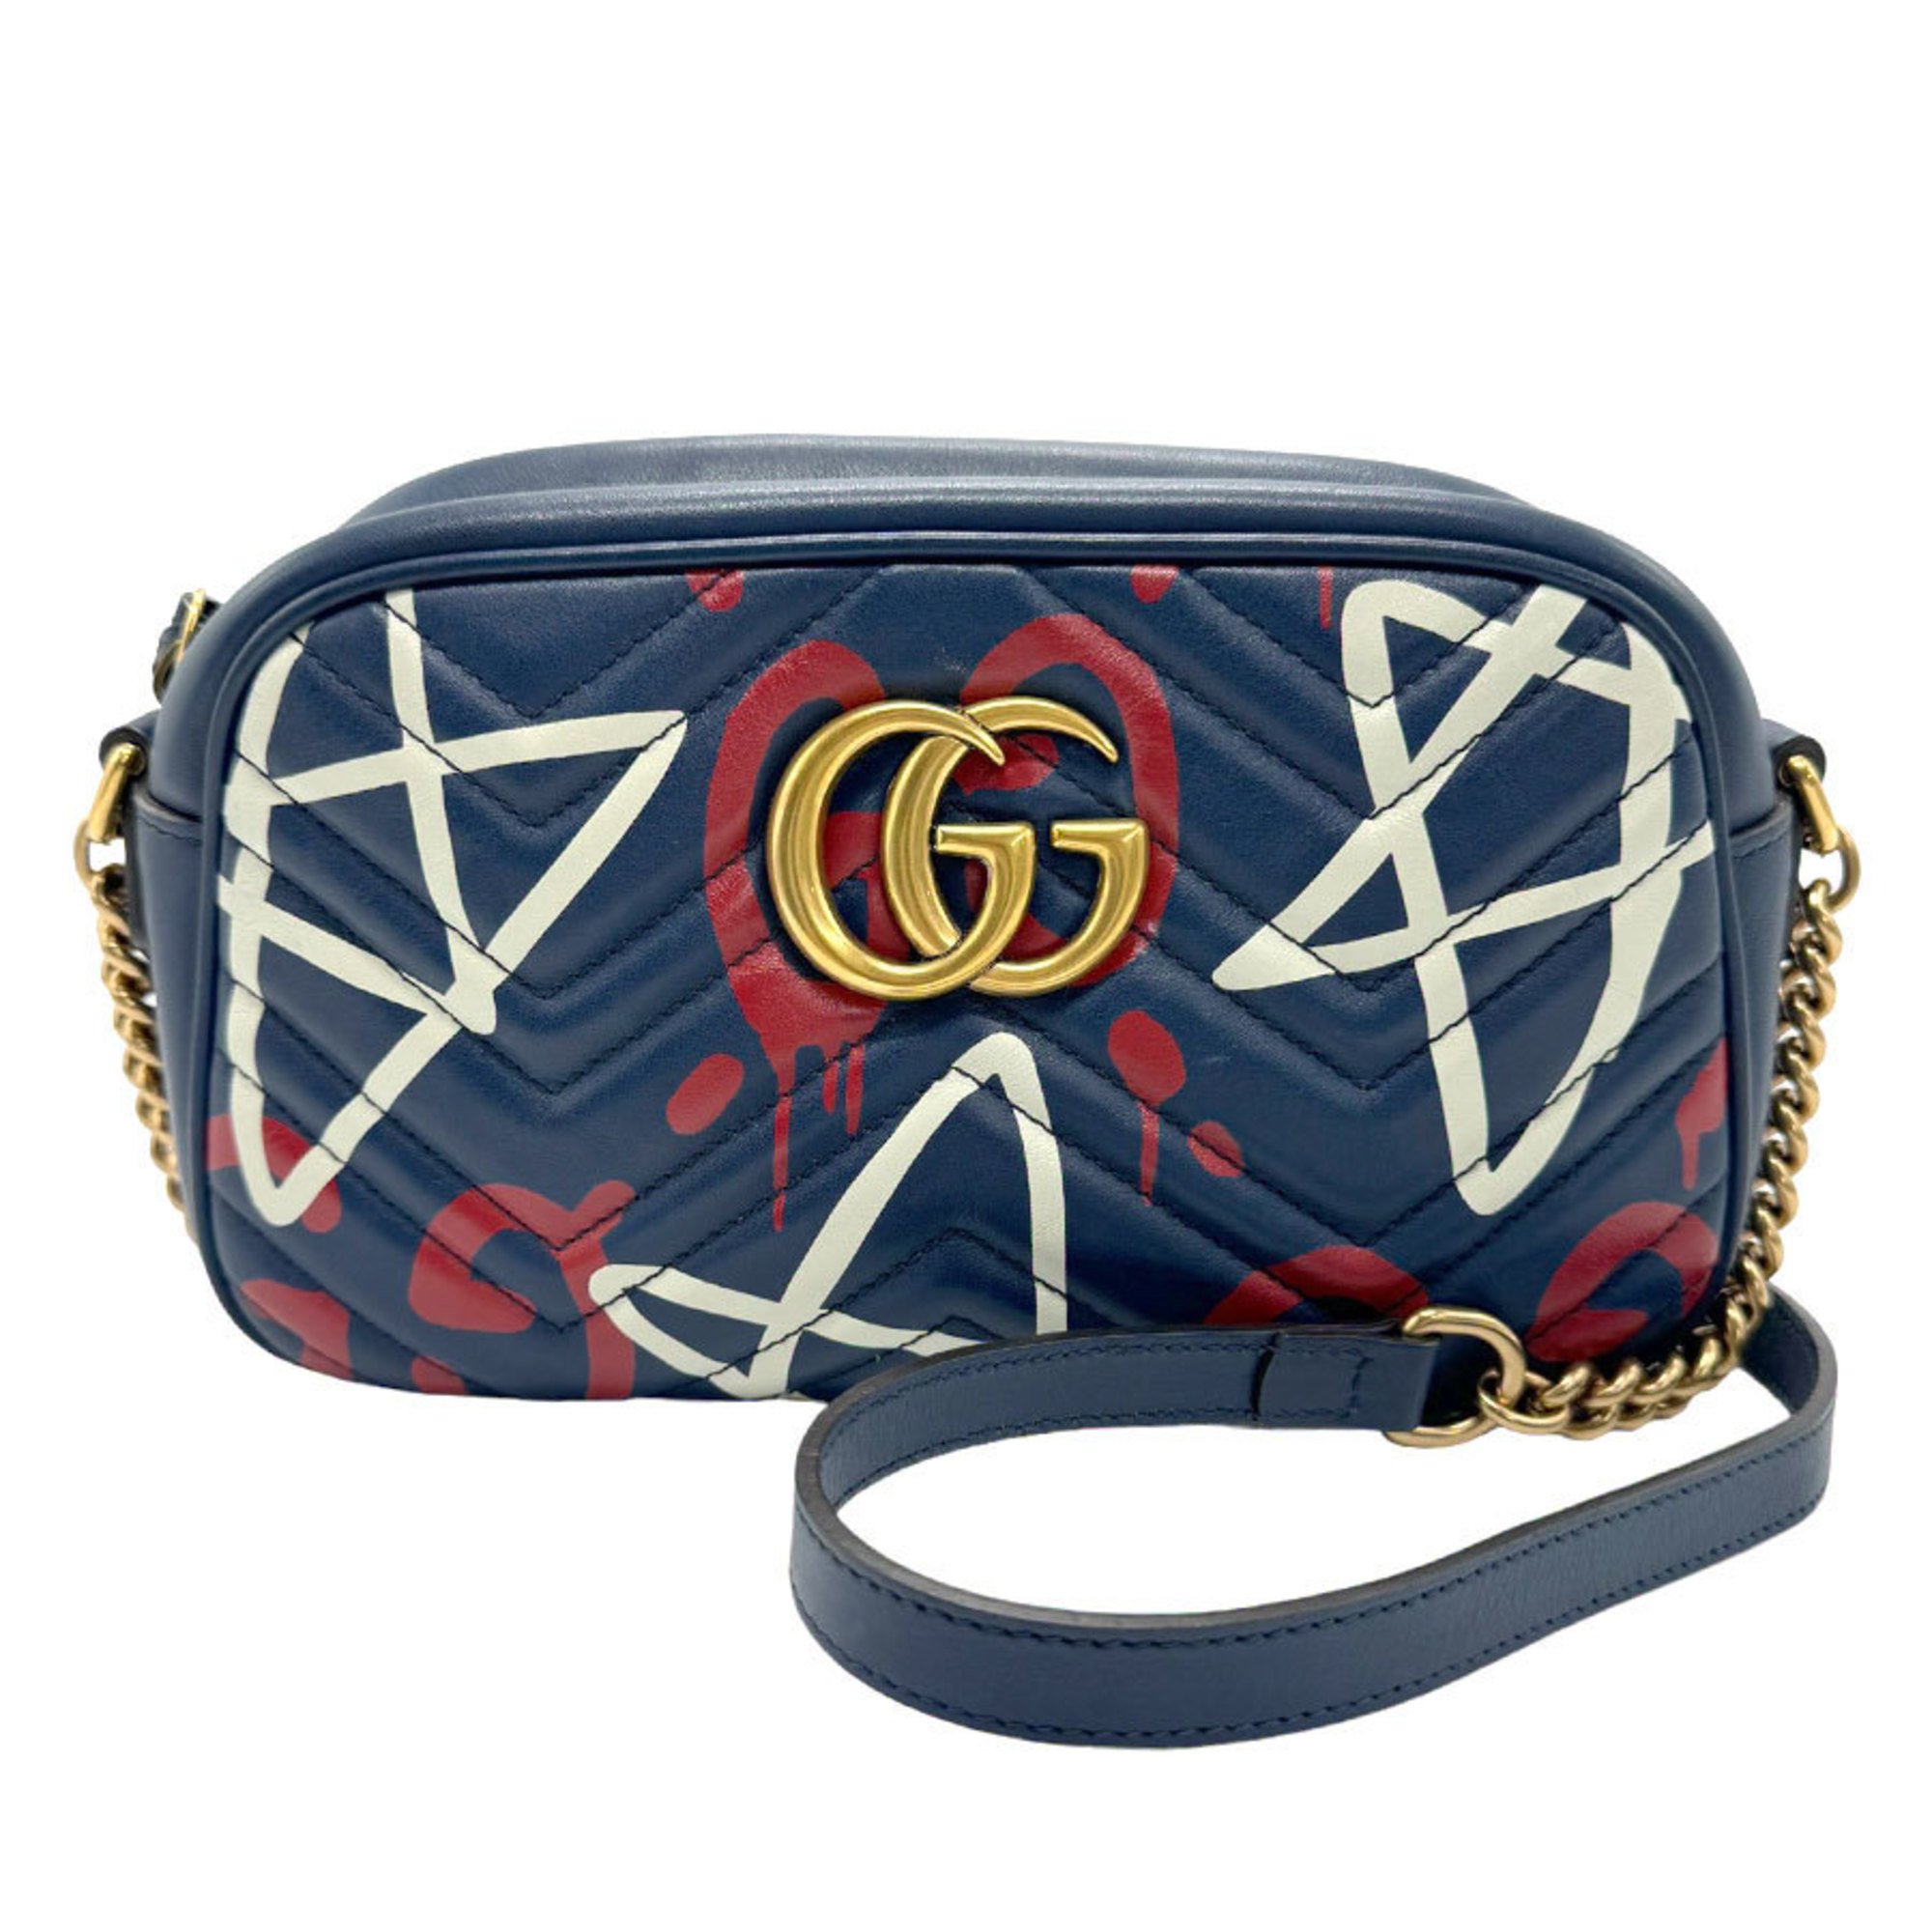 GUCCI Shoulder Bag GG Marmont Leather Navy Red White Gold Women's 447632 z1417